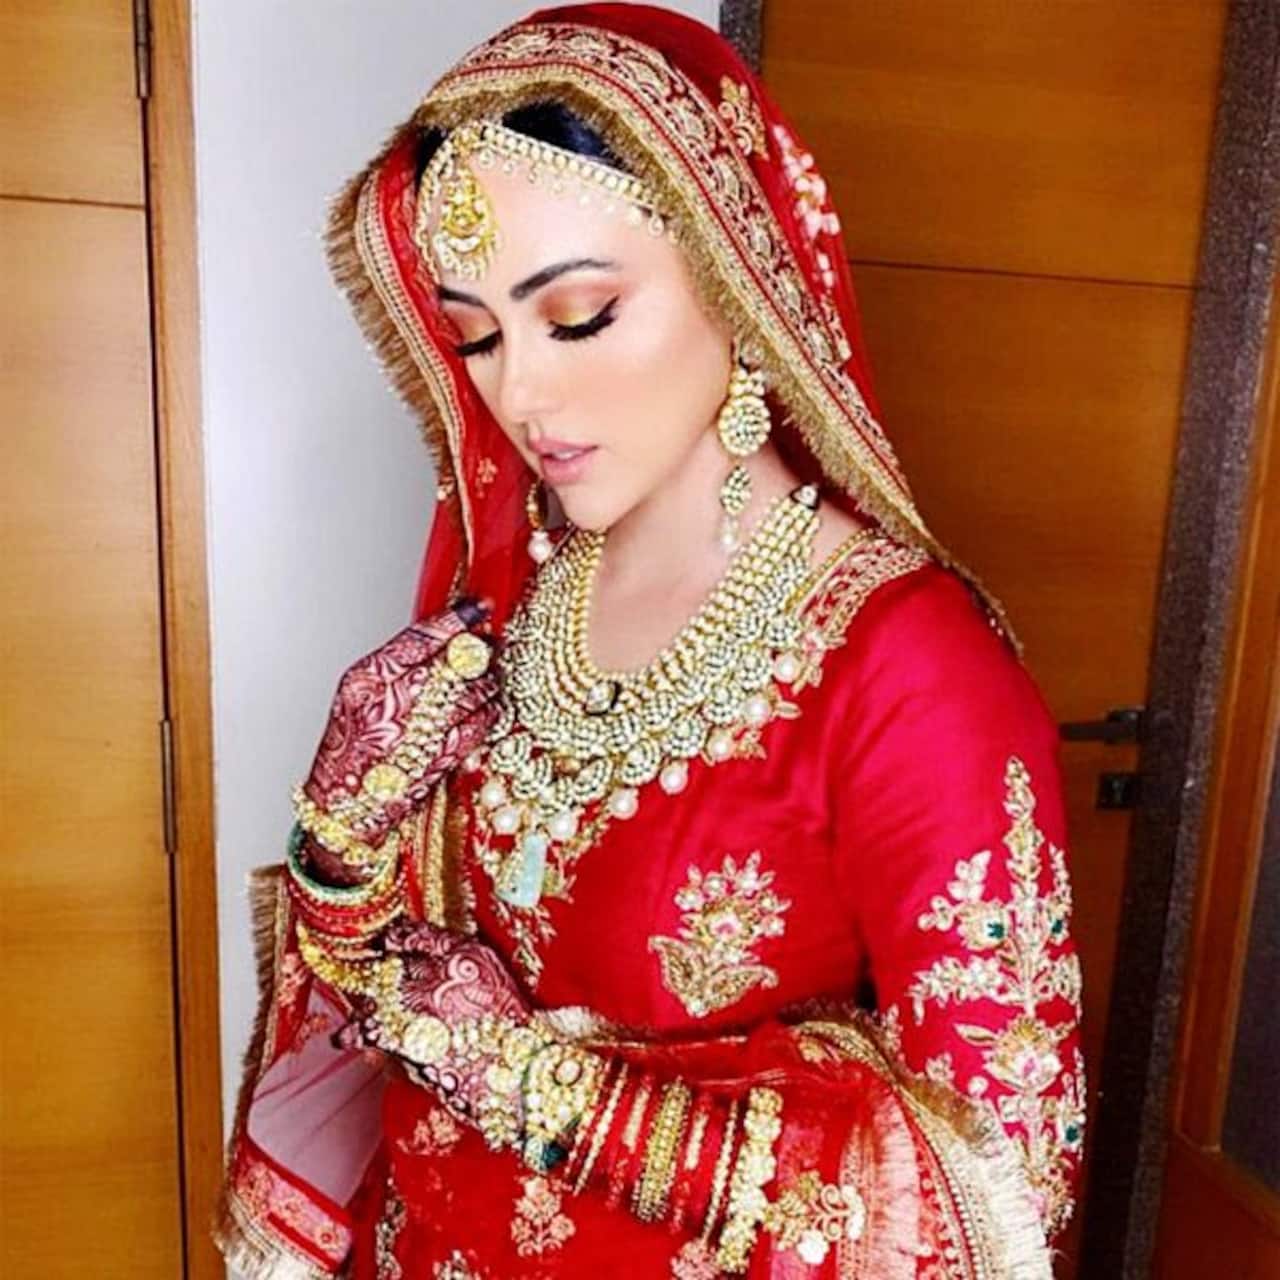 Bigg Boss fame Sana Khan shares THESE unseen pics of her ‘Walima look ...